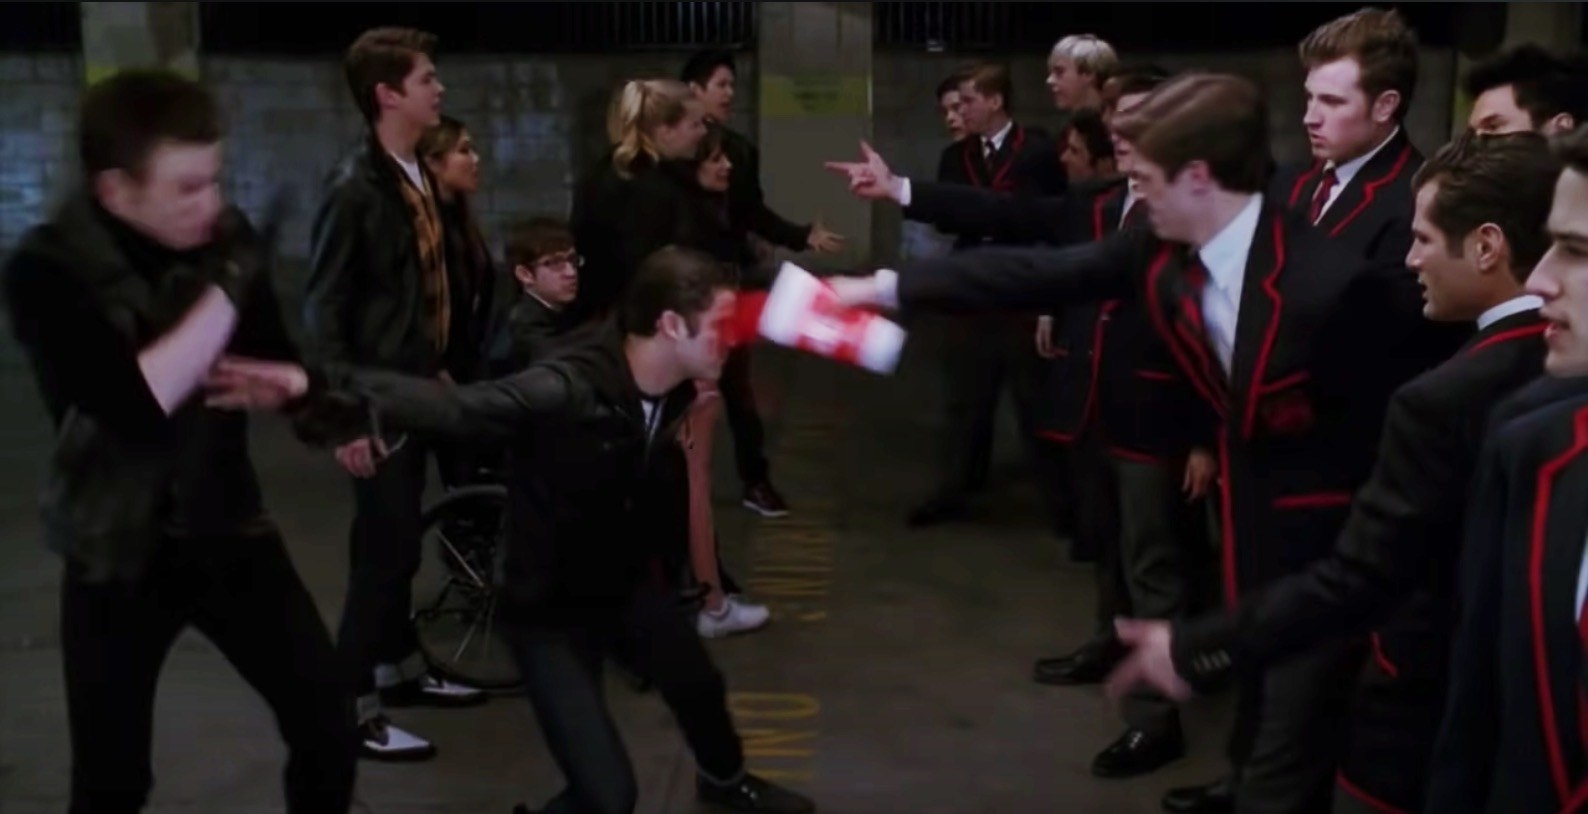 New Directions and the Warblers from &quot;Glee&quot; in a face-off